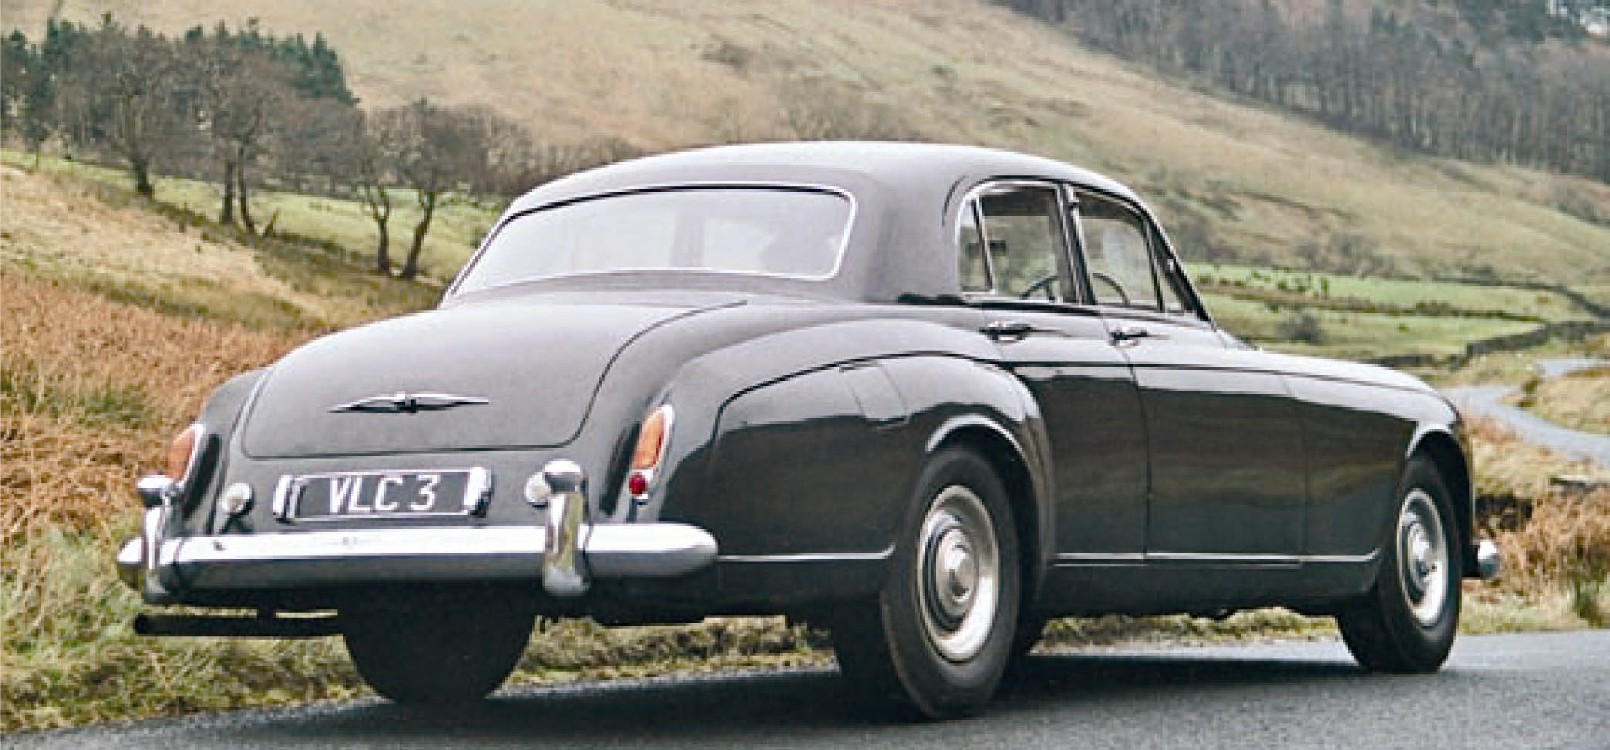 bentley s1 continental-pic. 3